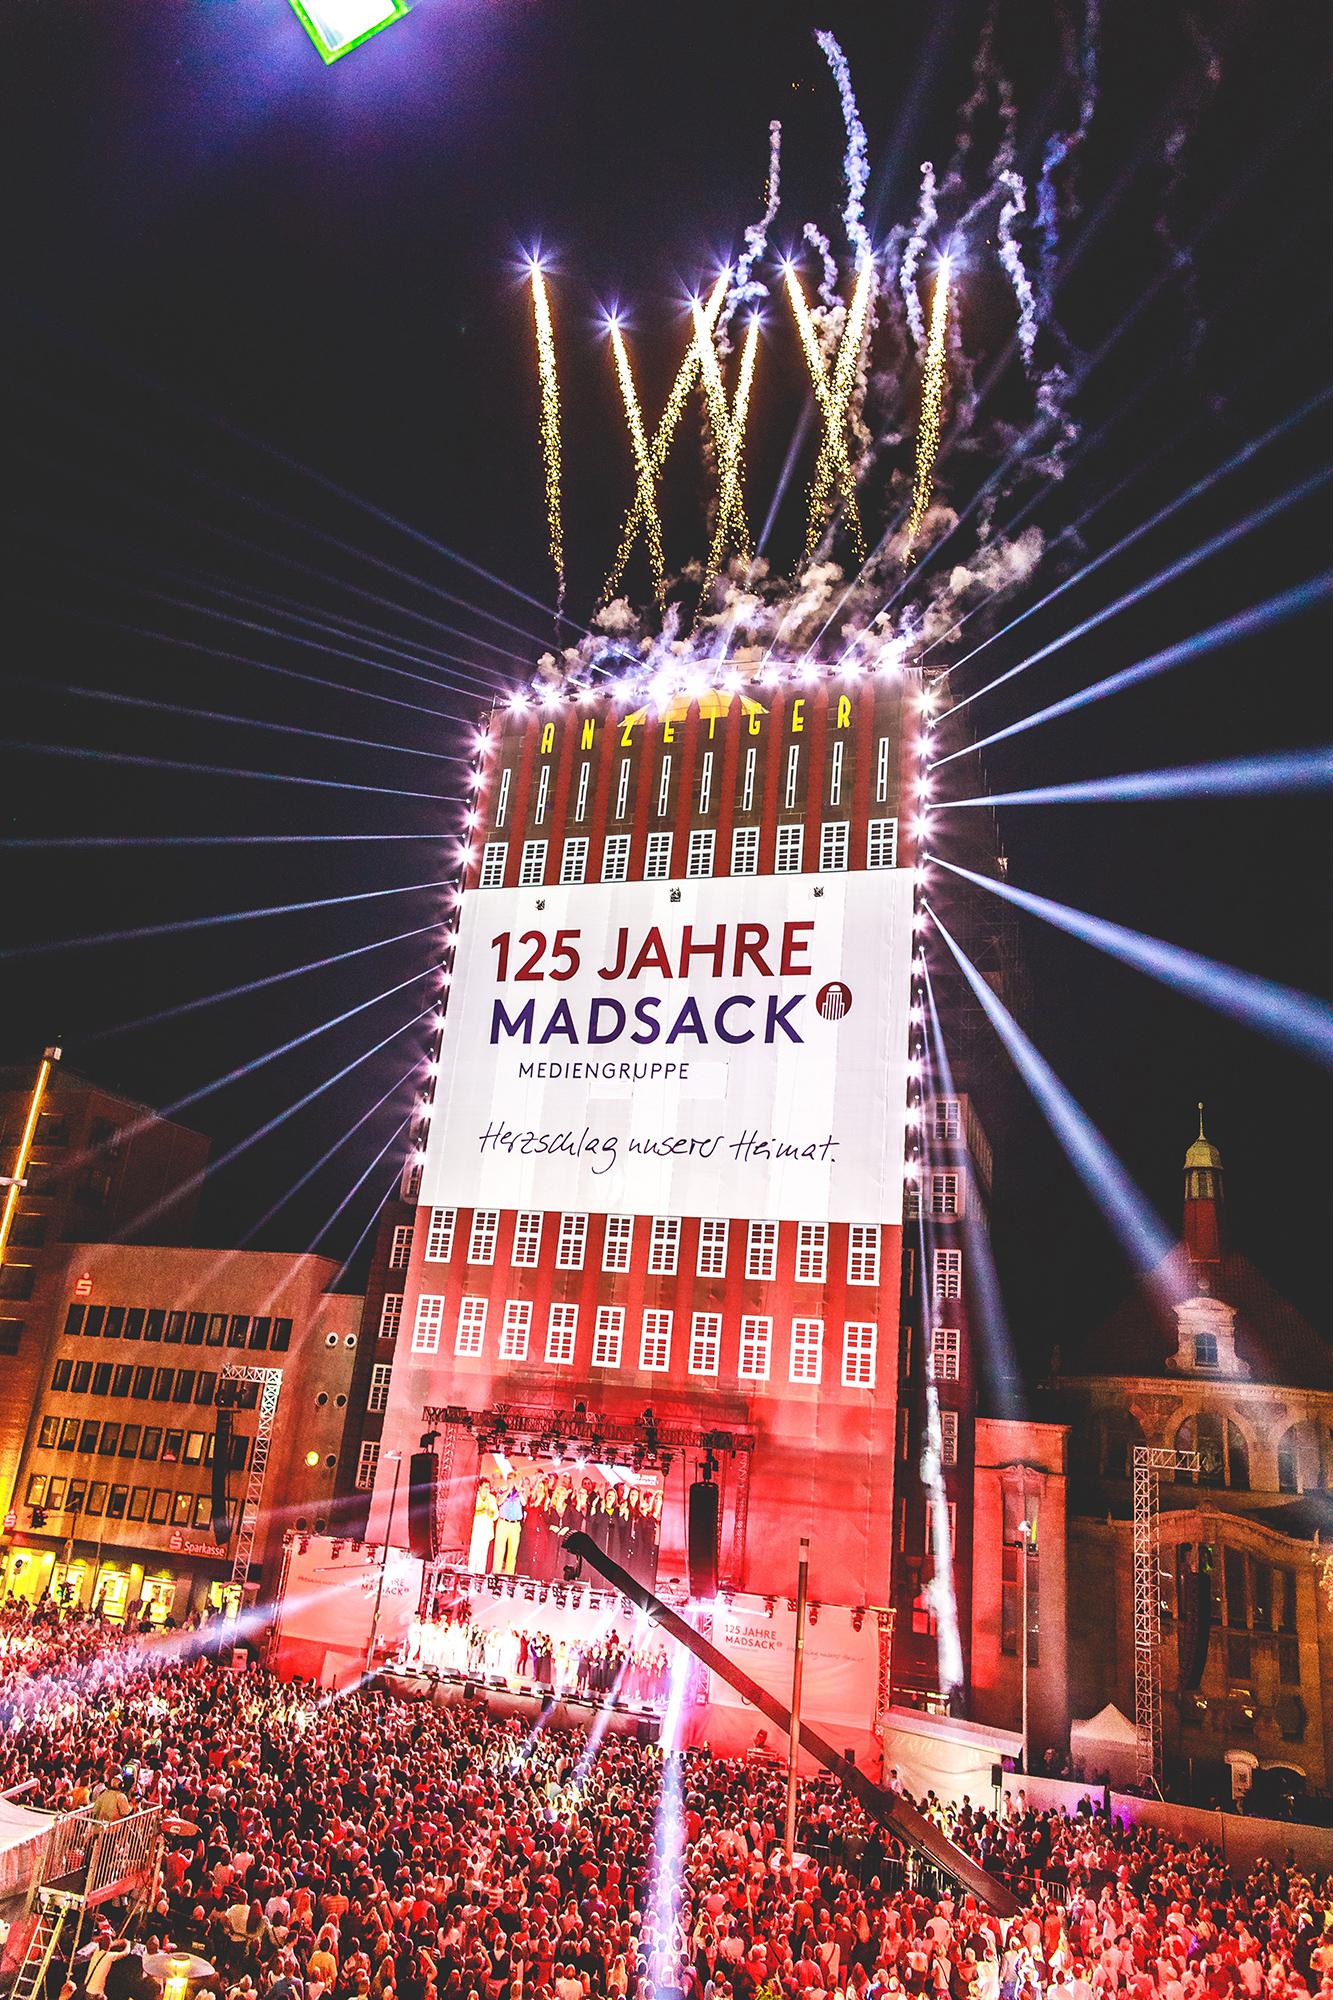 Video mapping of a building and "125 Jahre Madsack" on a large vertical stage. Fireworks burst out from the top. A large crowd watches outdoors.